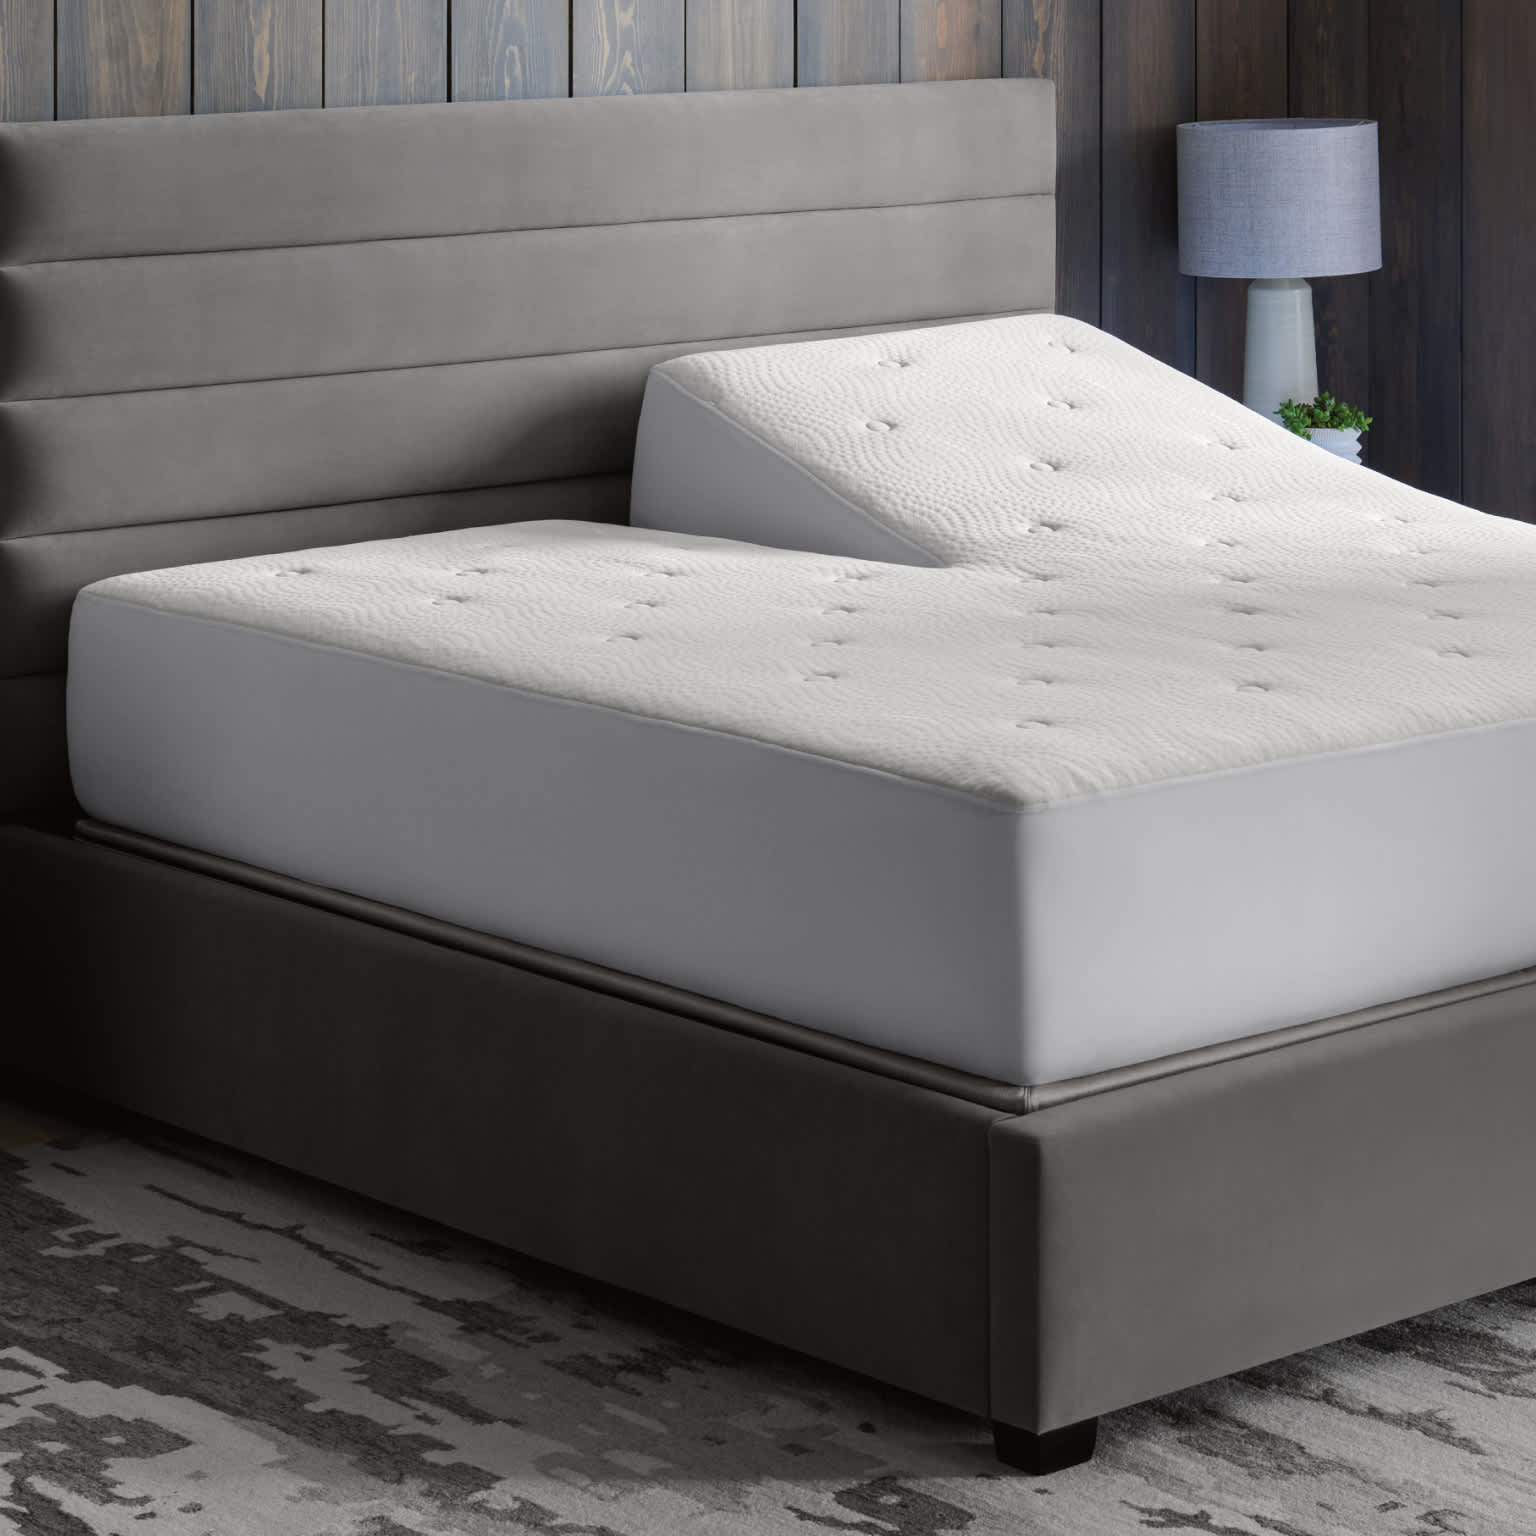 https://cdn.sleepnumber.com/image/upload/f_auto,q_auto:eco/v1682710172/workarea/catalog/product_images/climate360-total-protection-mattress-pad/C360-TPMP_PDP_Postcard_Gallery4